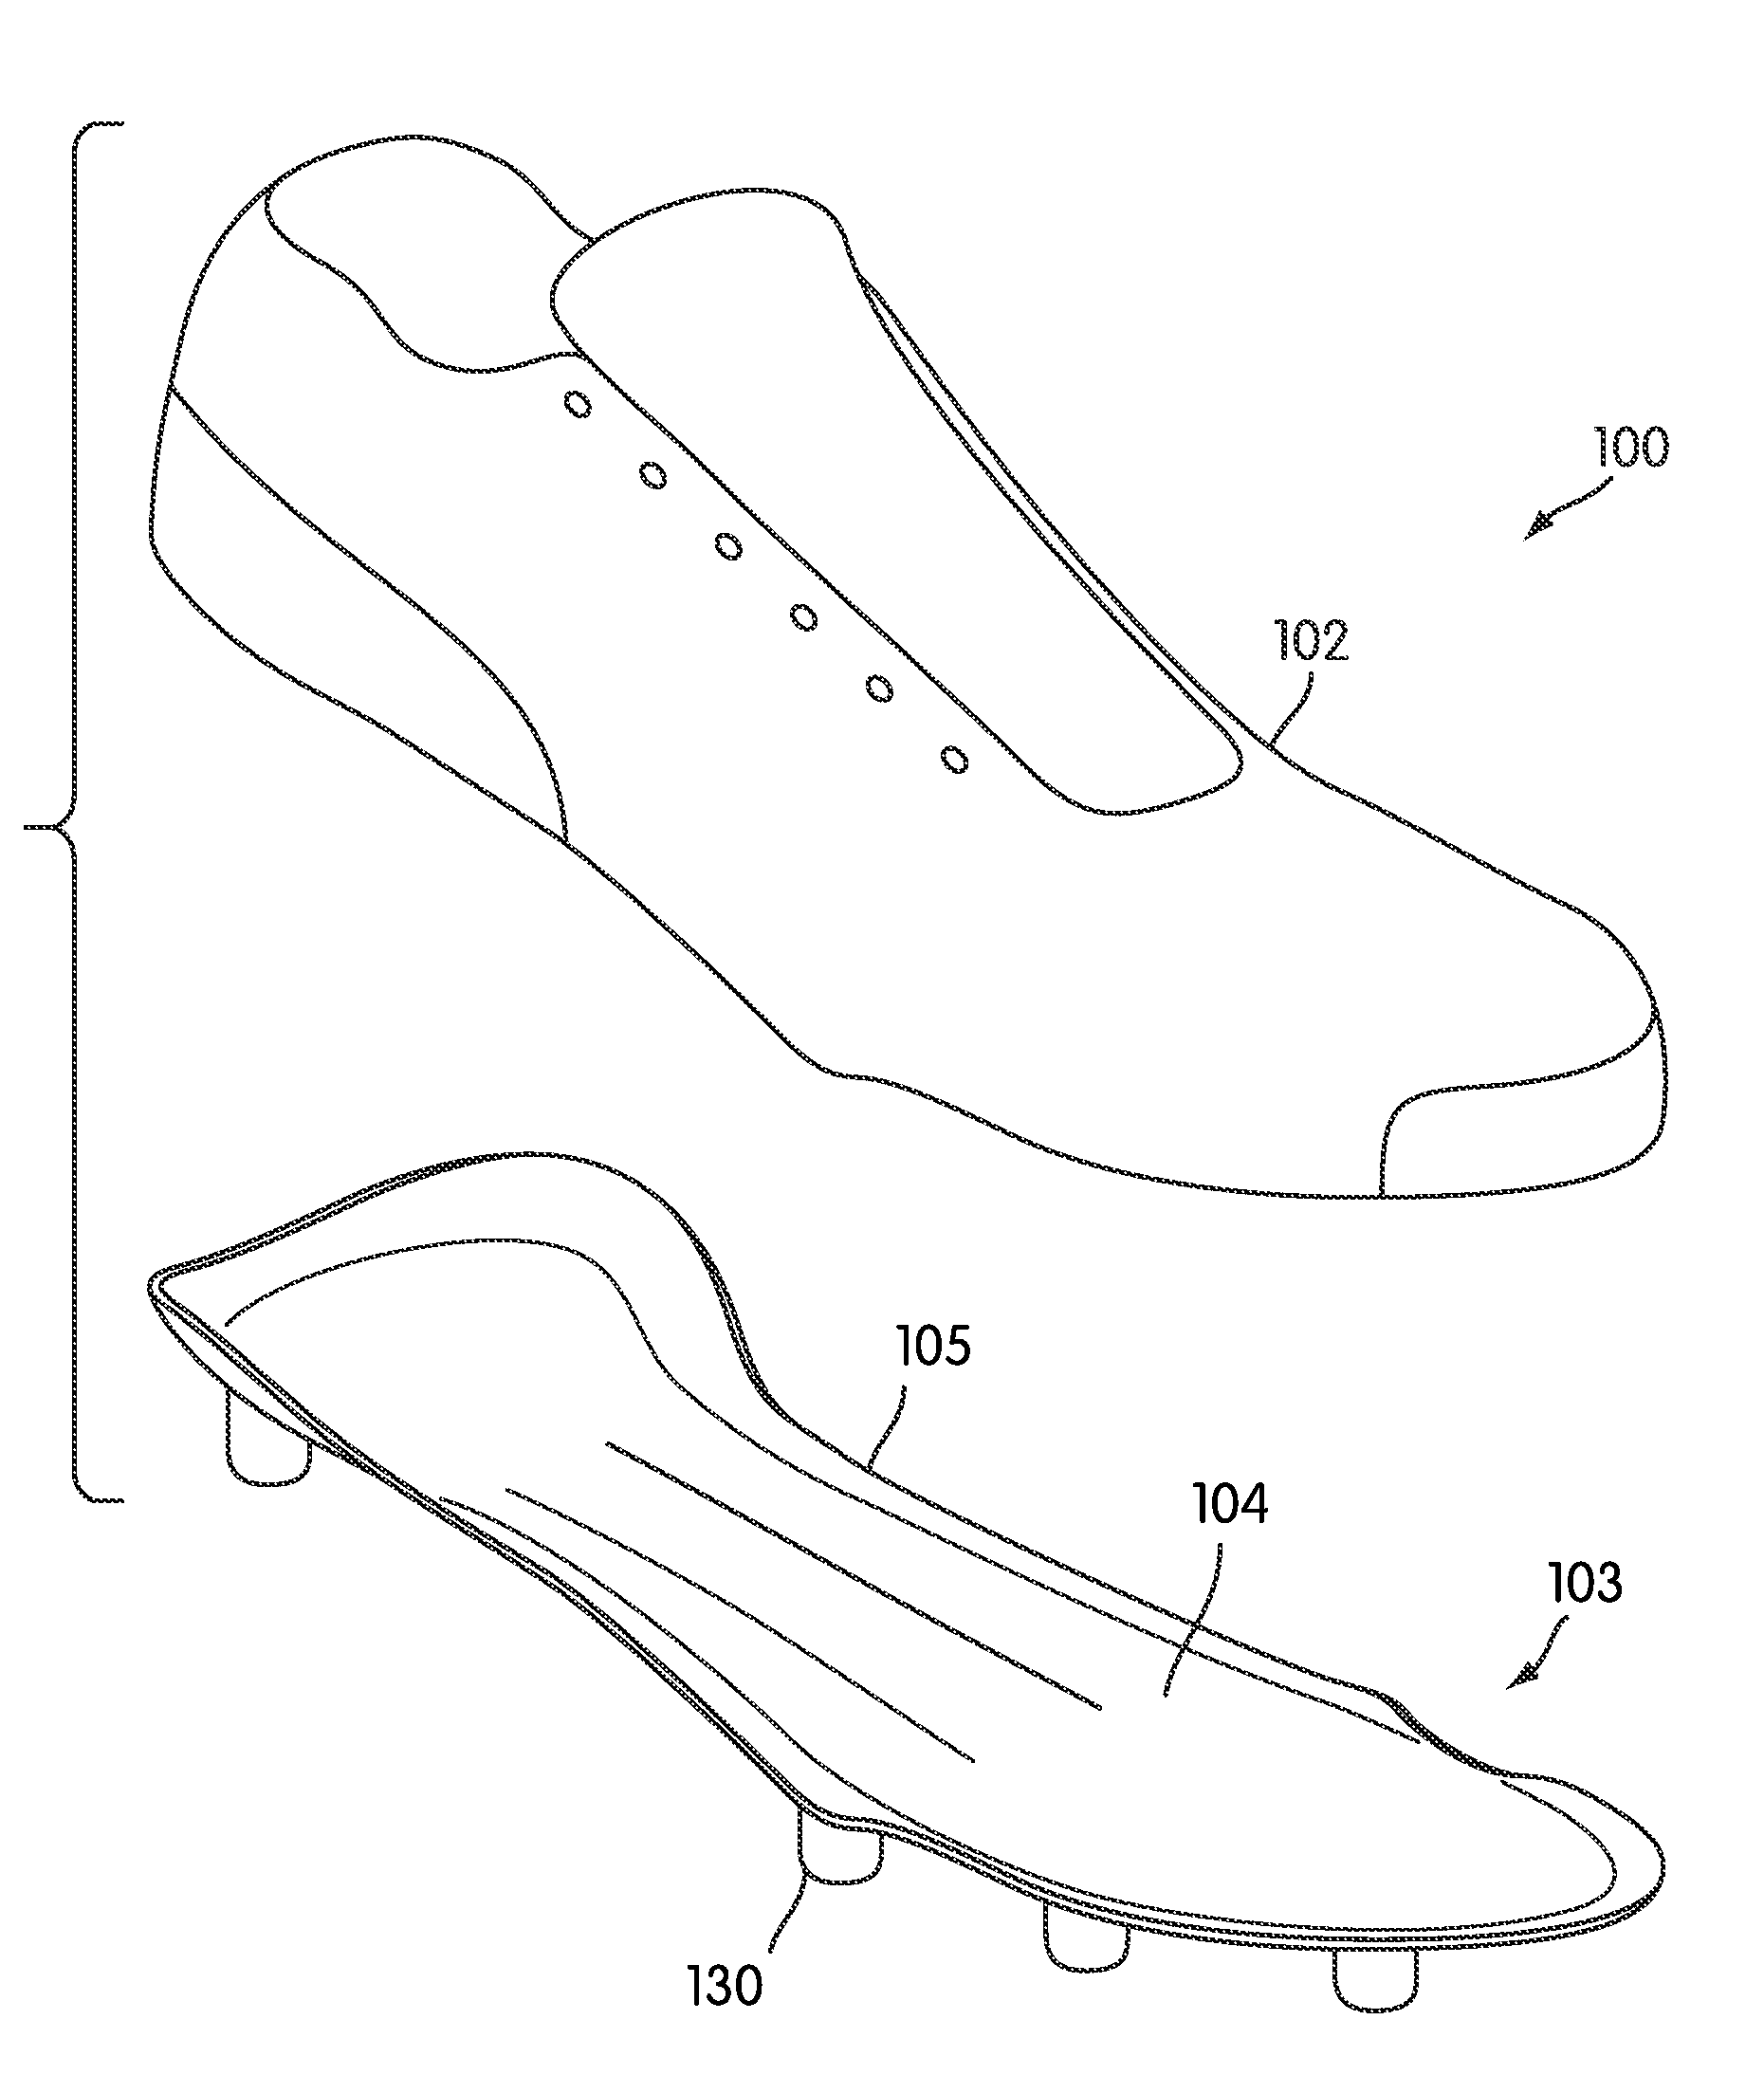 Article of Footwear Including Full Length Composite Plate